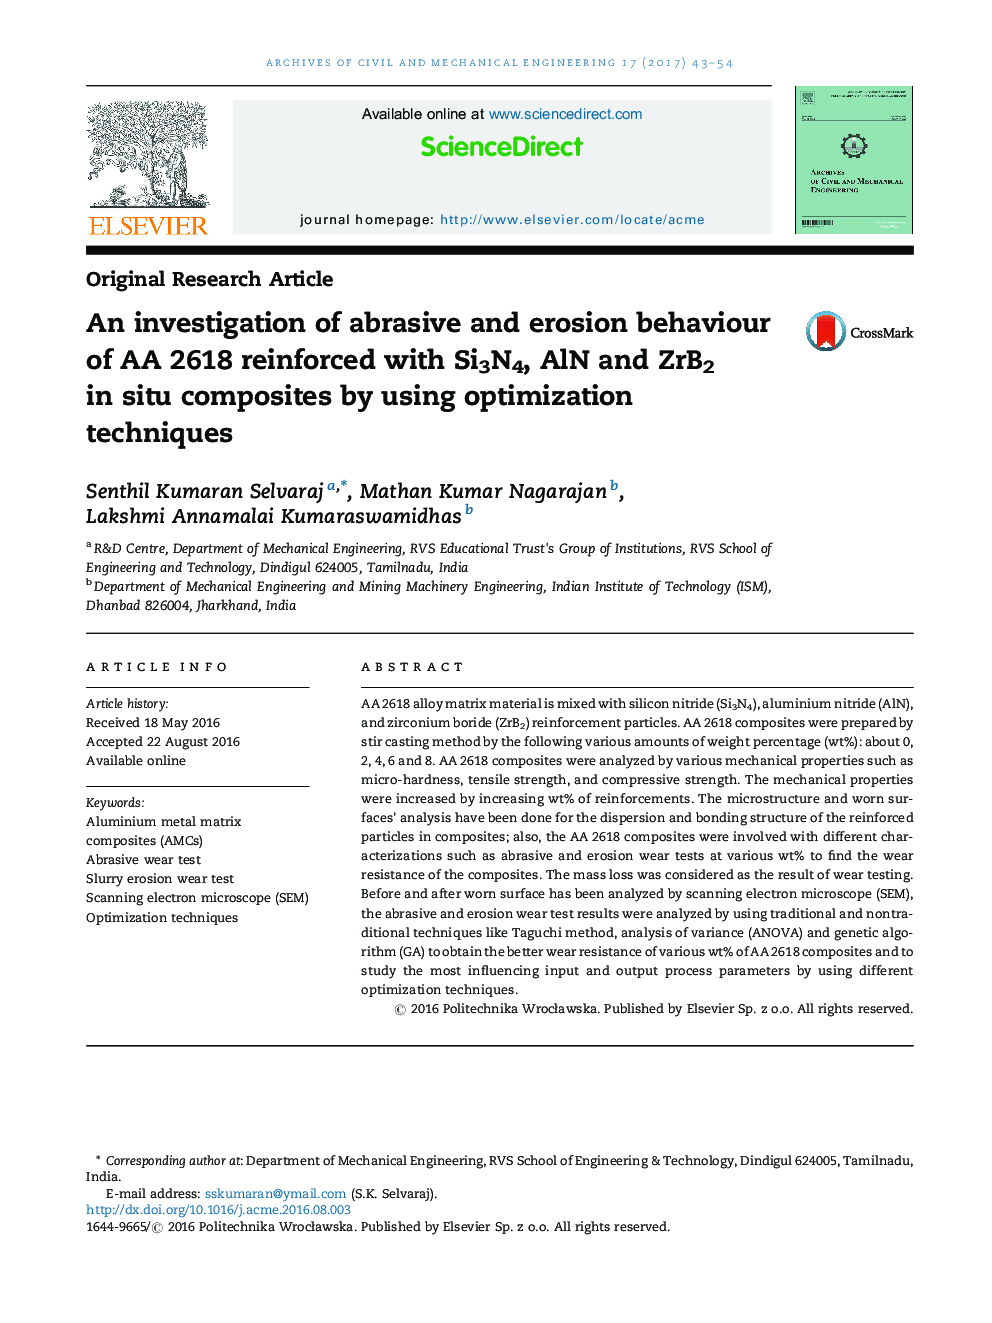 An investigation of abrasive and erosion behaviour of AA 2618 reinforced with Si3N4, AlN and ZrB2 in situ composites by using optimization techniques